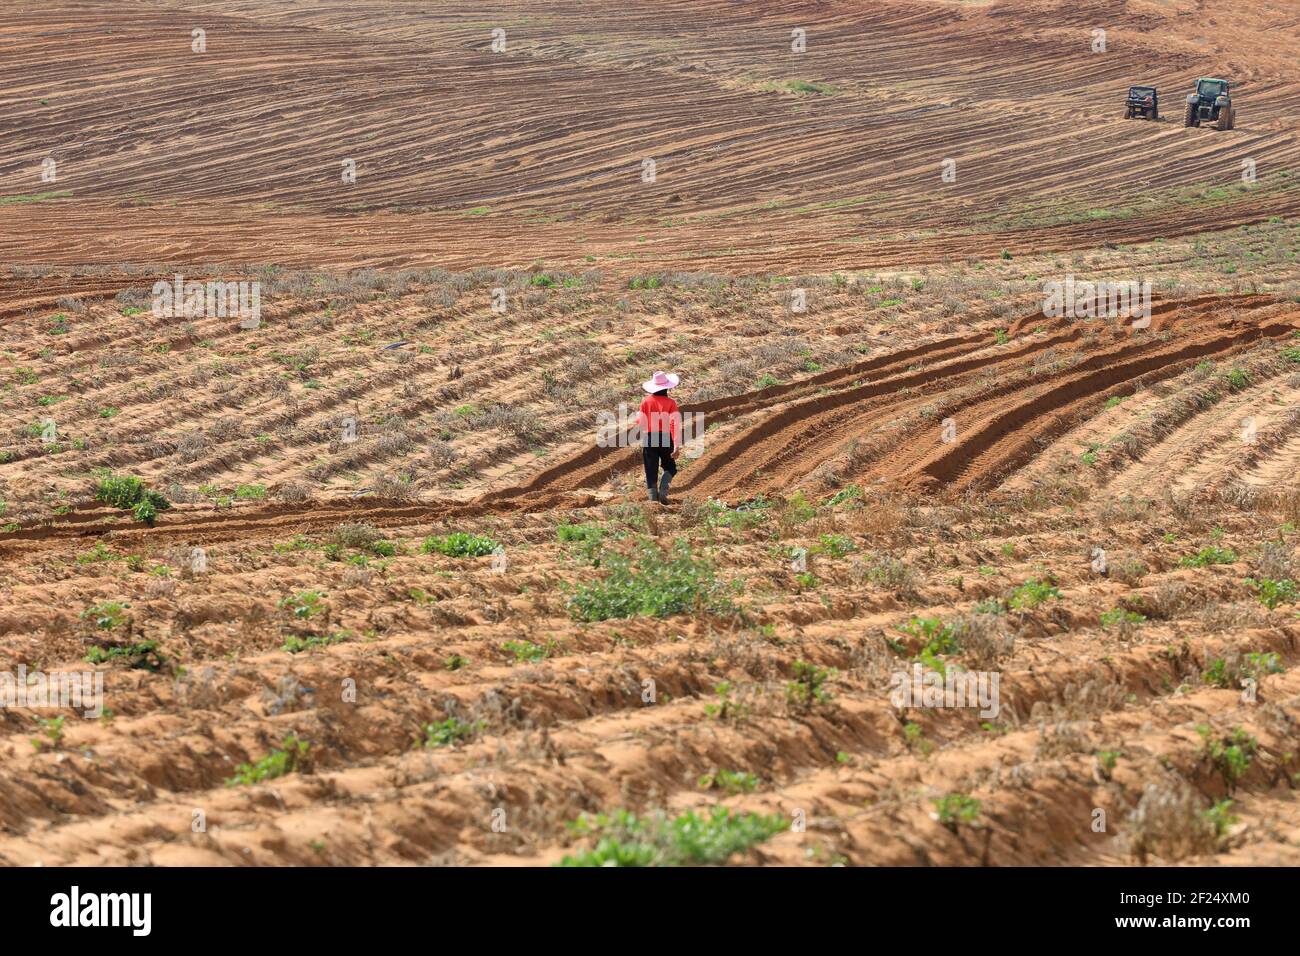 Farm Worker in the middle of a large agricultural field. Stock Photo